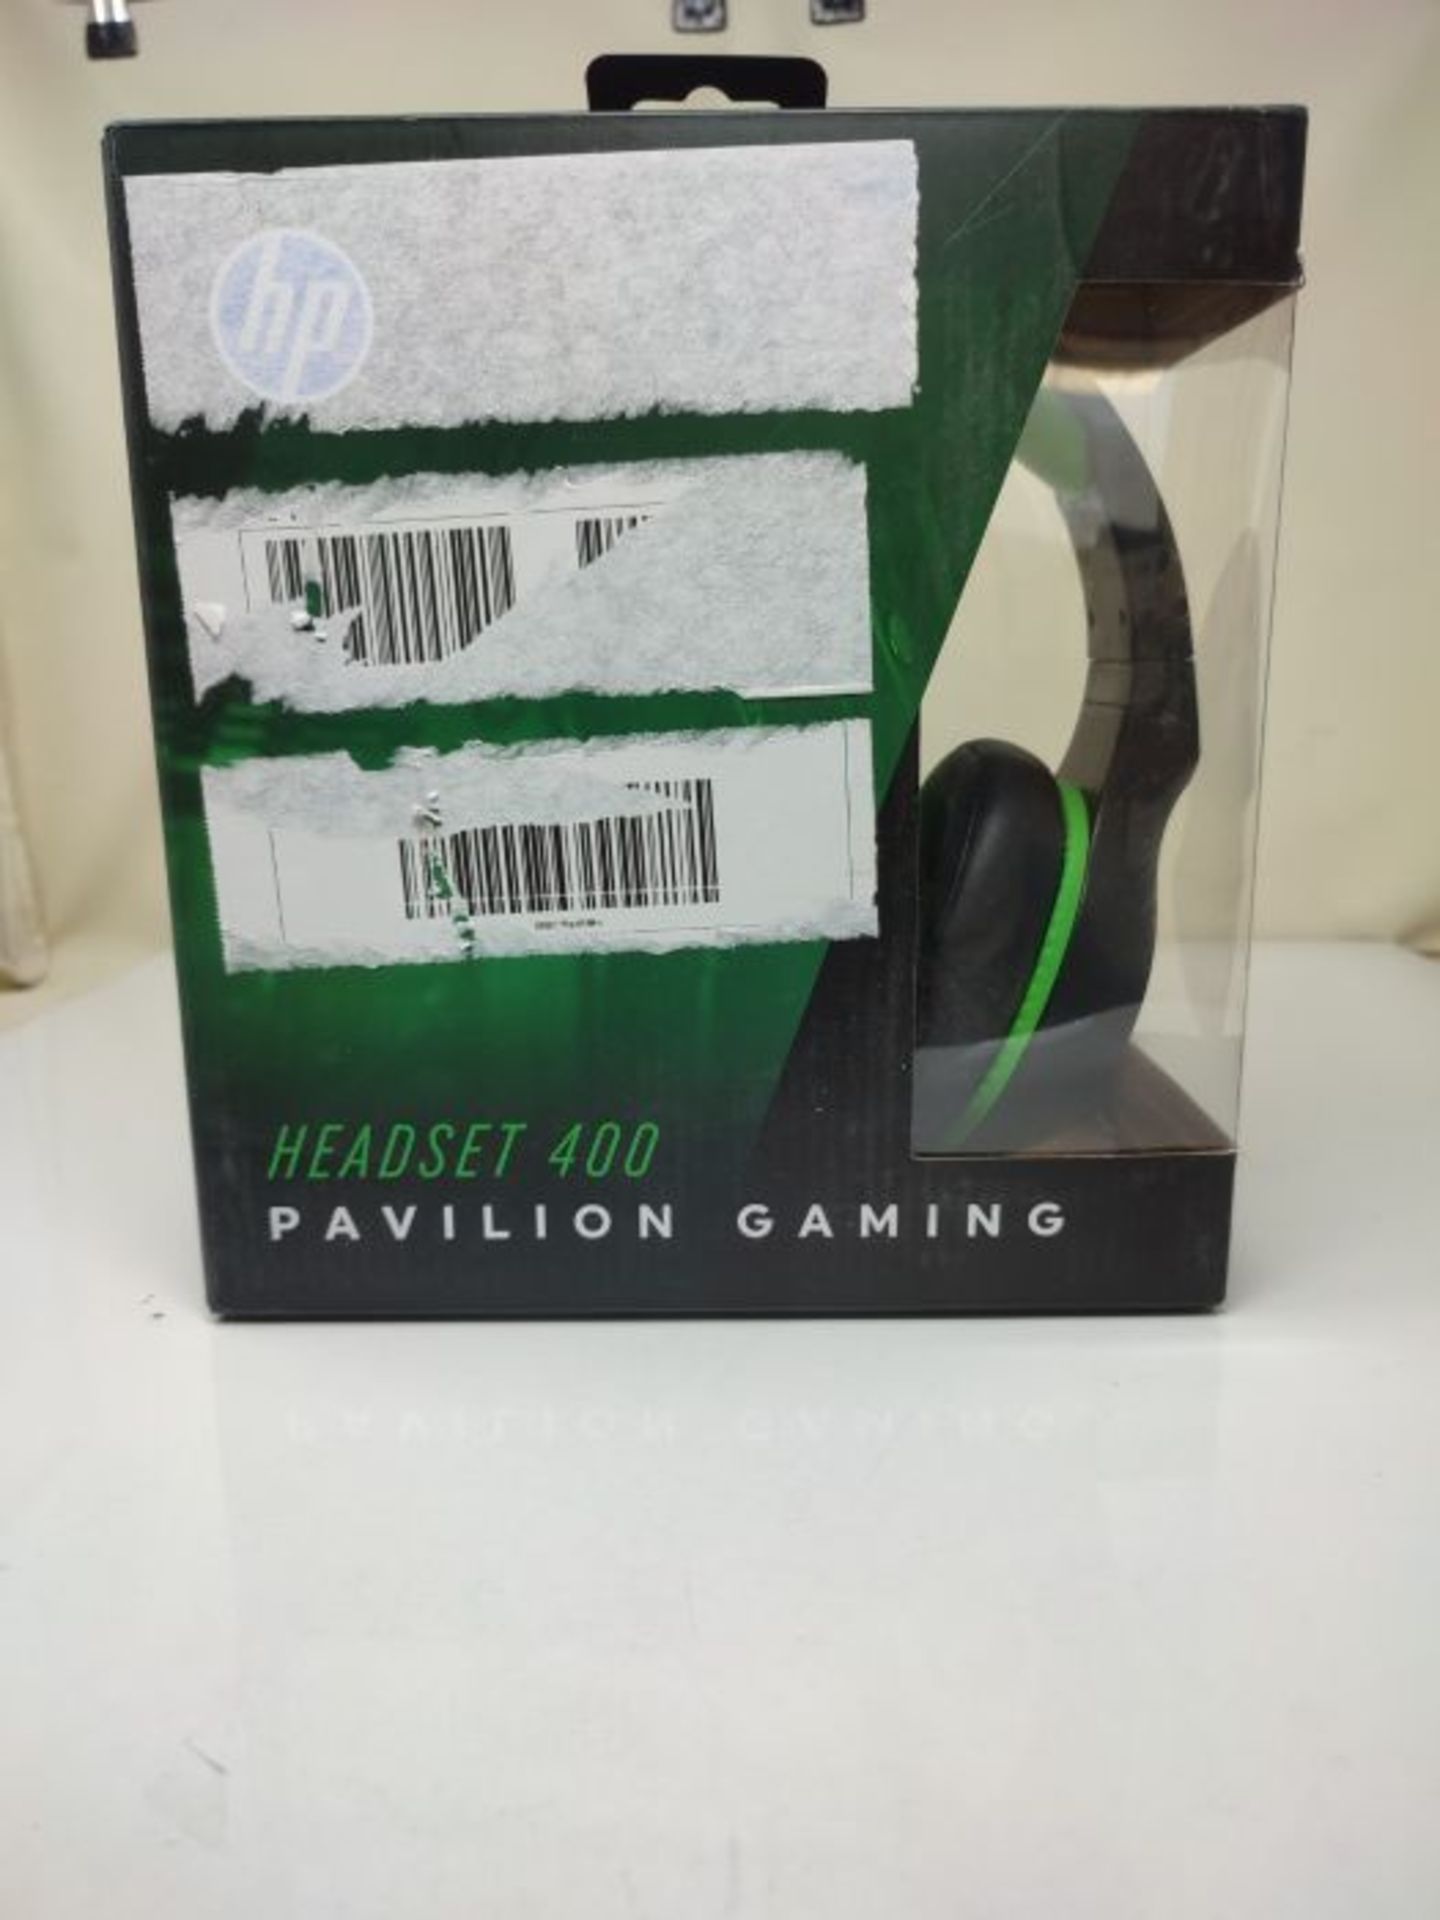 HP Pavilion Gaming Green Headset 400 - Padded Headset with Adjustable Mic and Control - Image 2 of 3